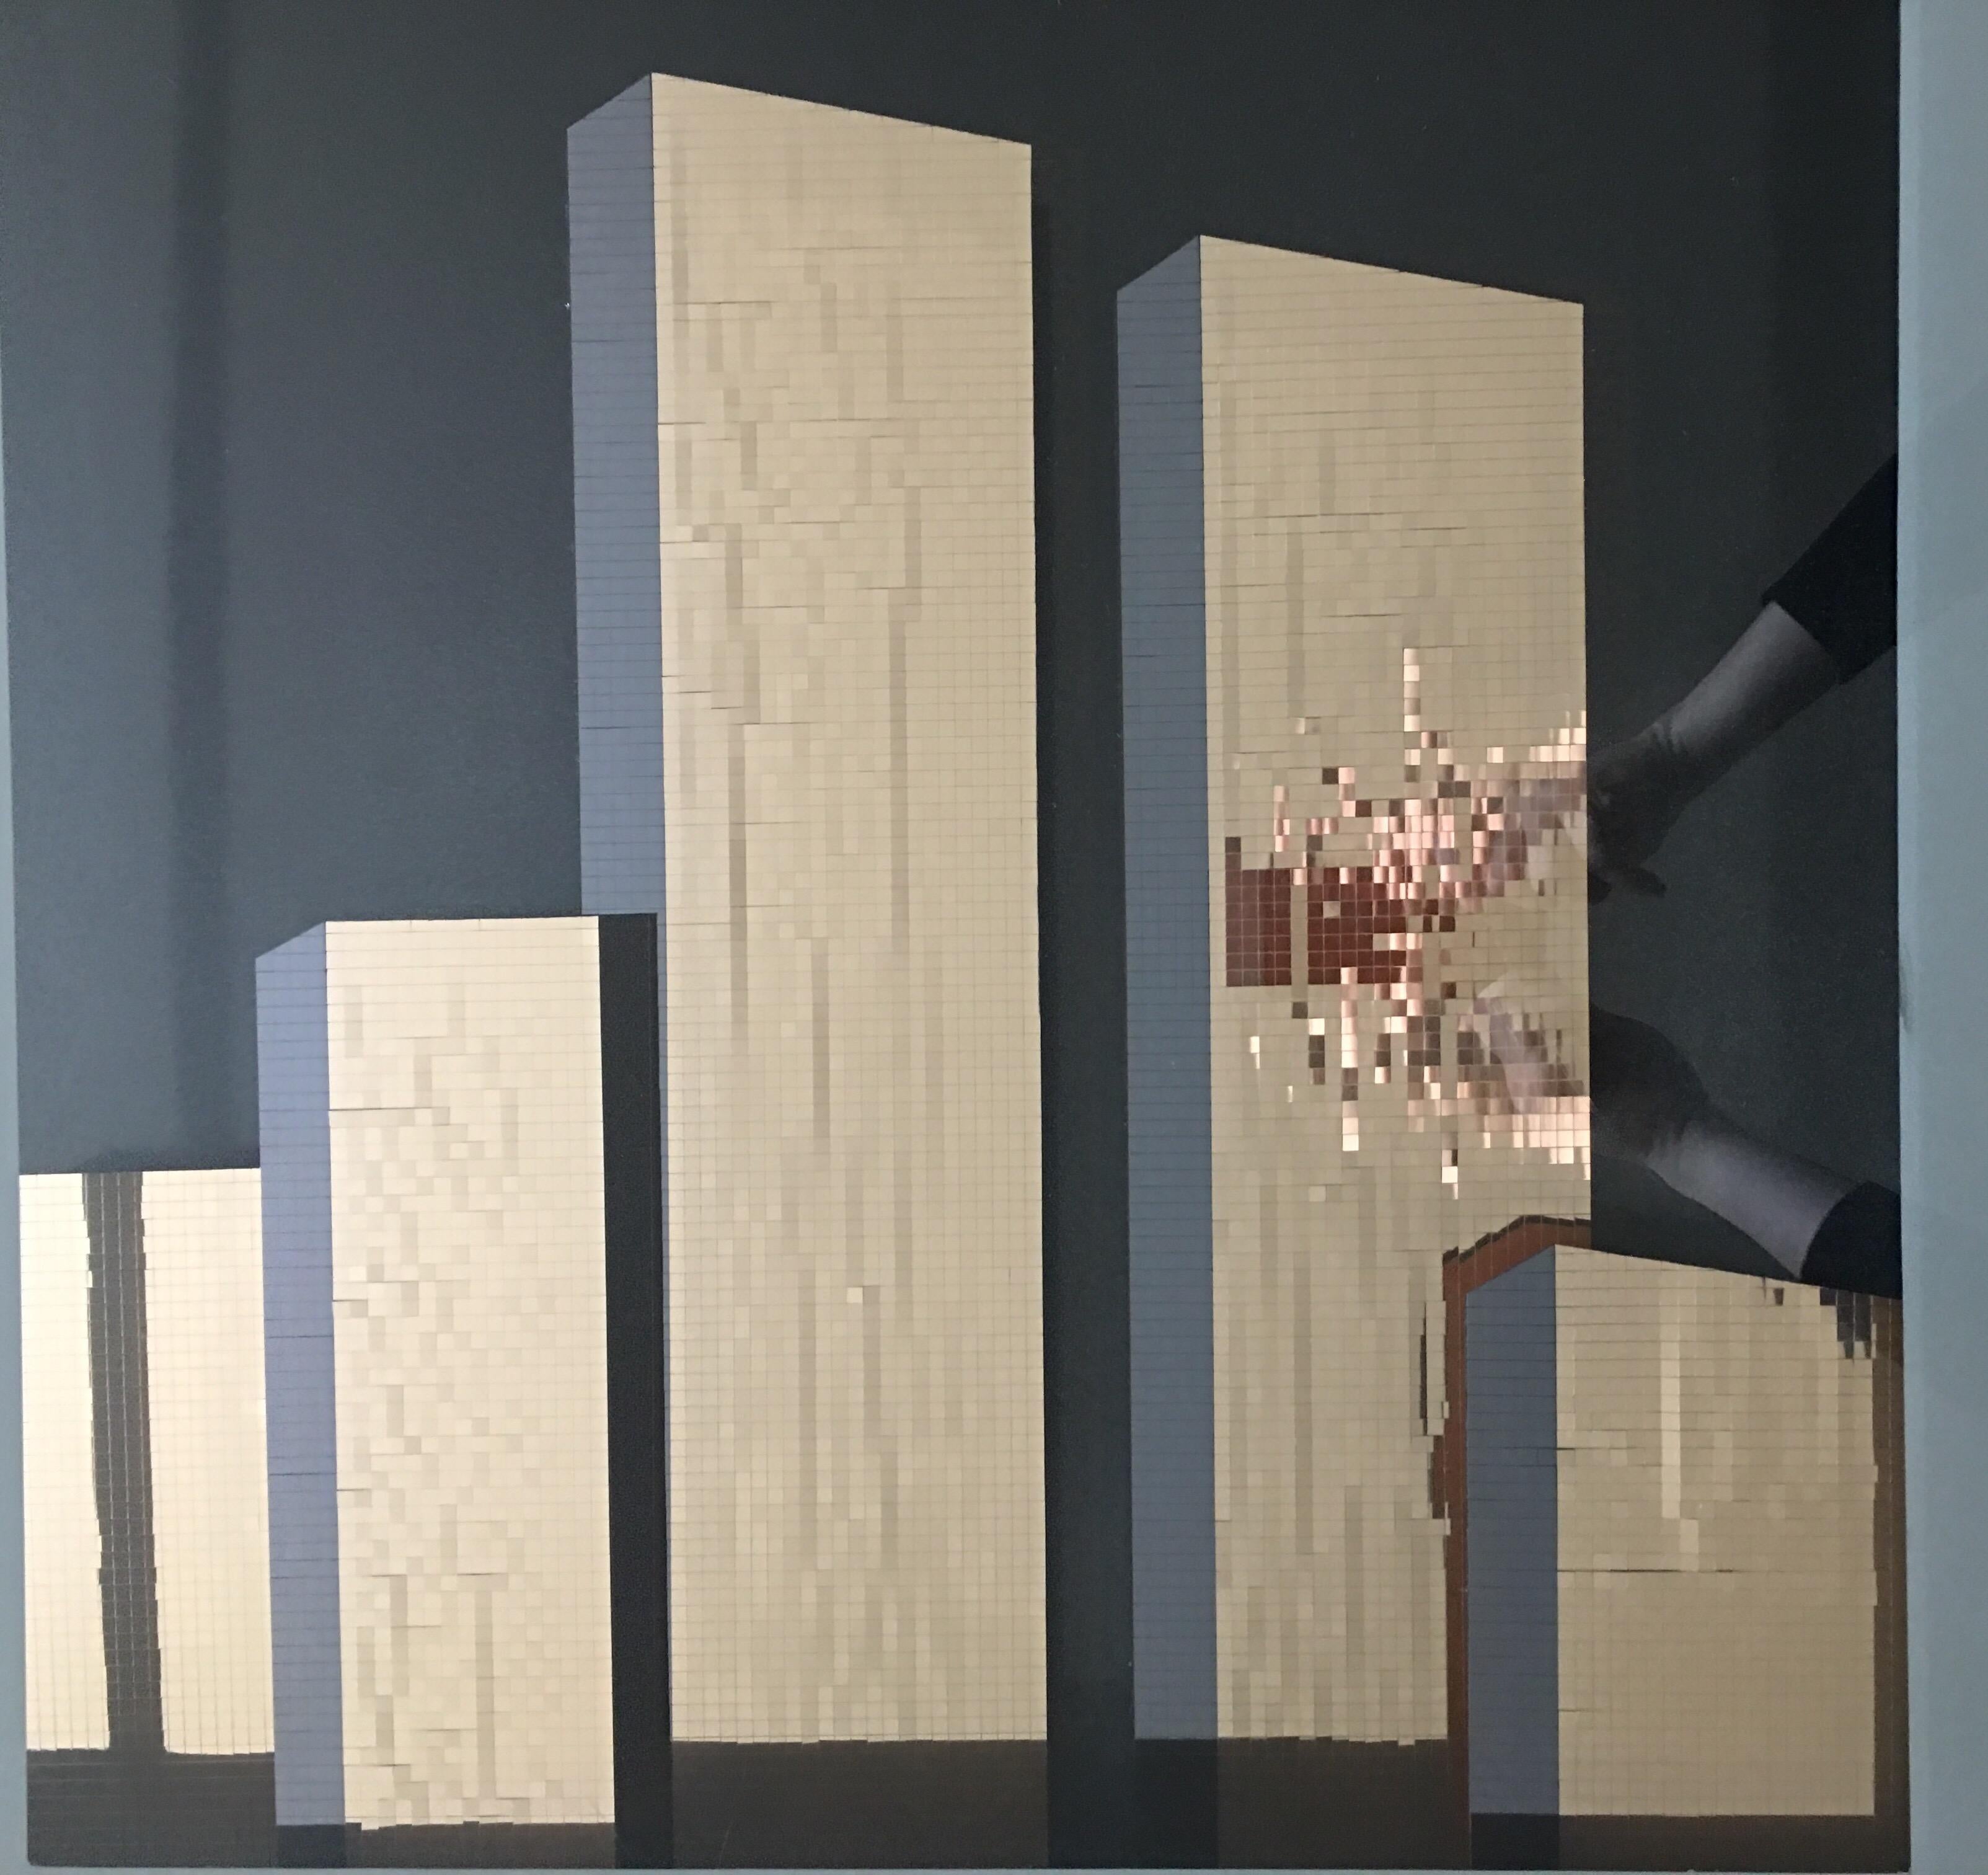 Large modern mosaic cityscape wall art sculpture by Jon Gilmore. The dimensional New York City skyline is composed of sparkly reflective disco ball-like mirrored gold tiles. This dimensional art piece is framed in an acrylic box and trimmed in shiny